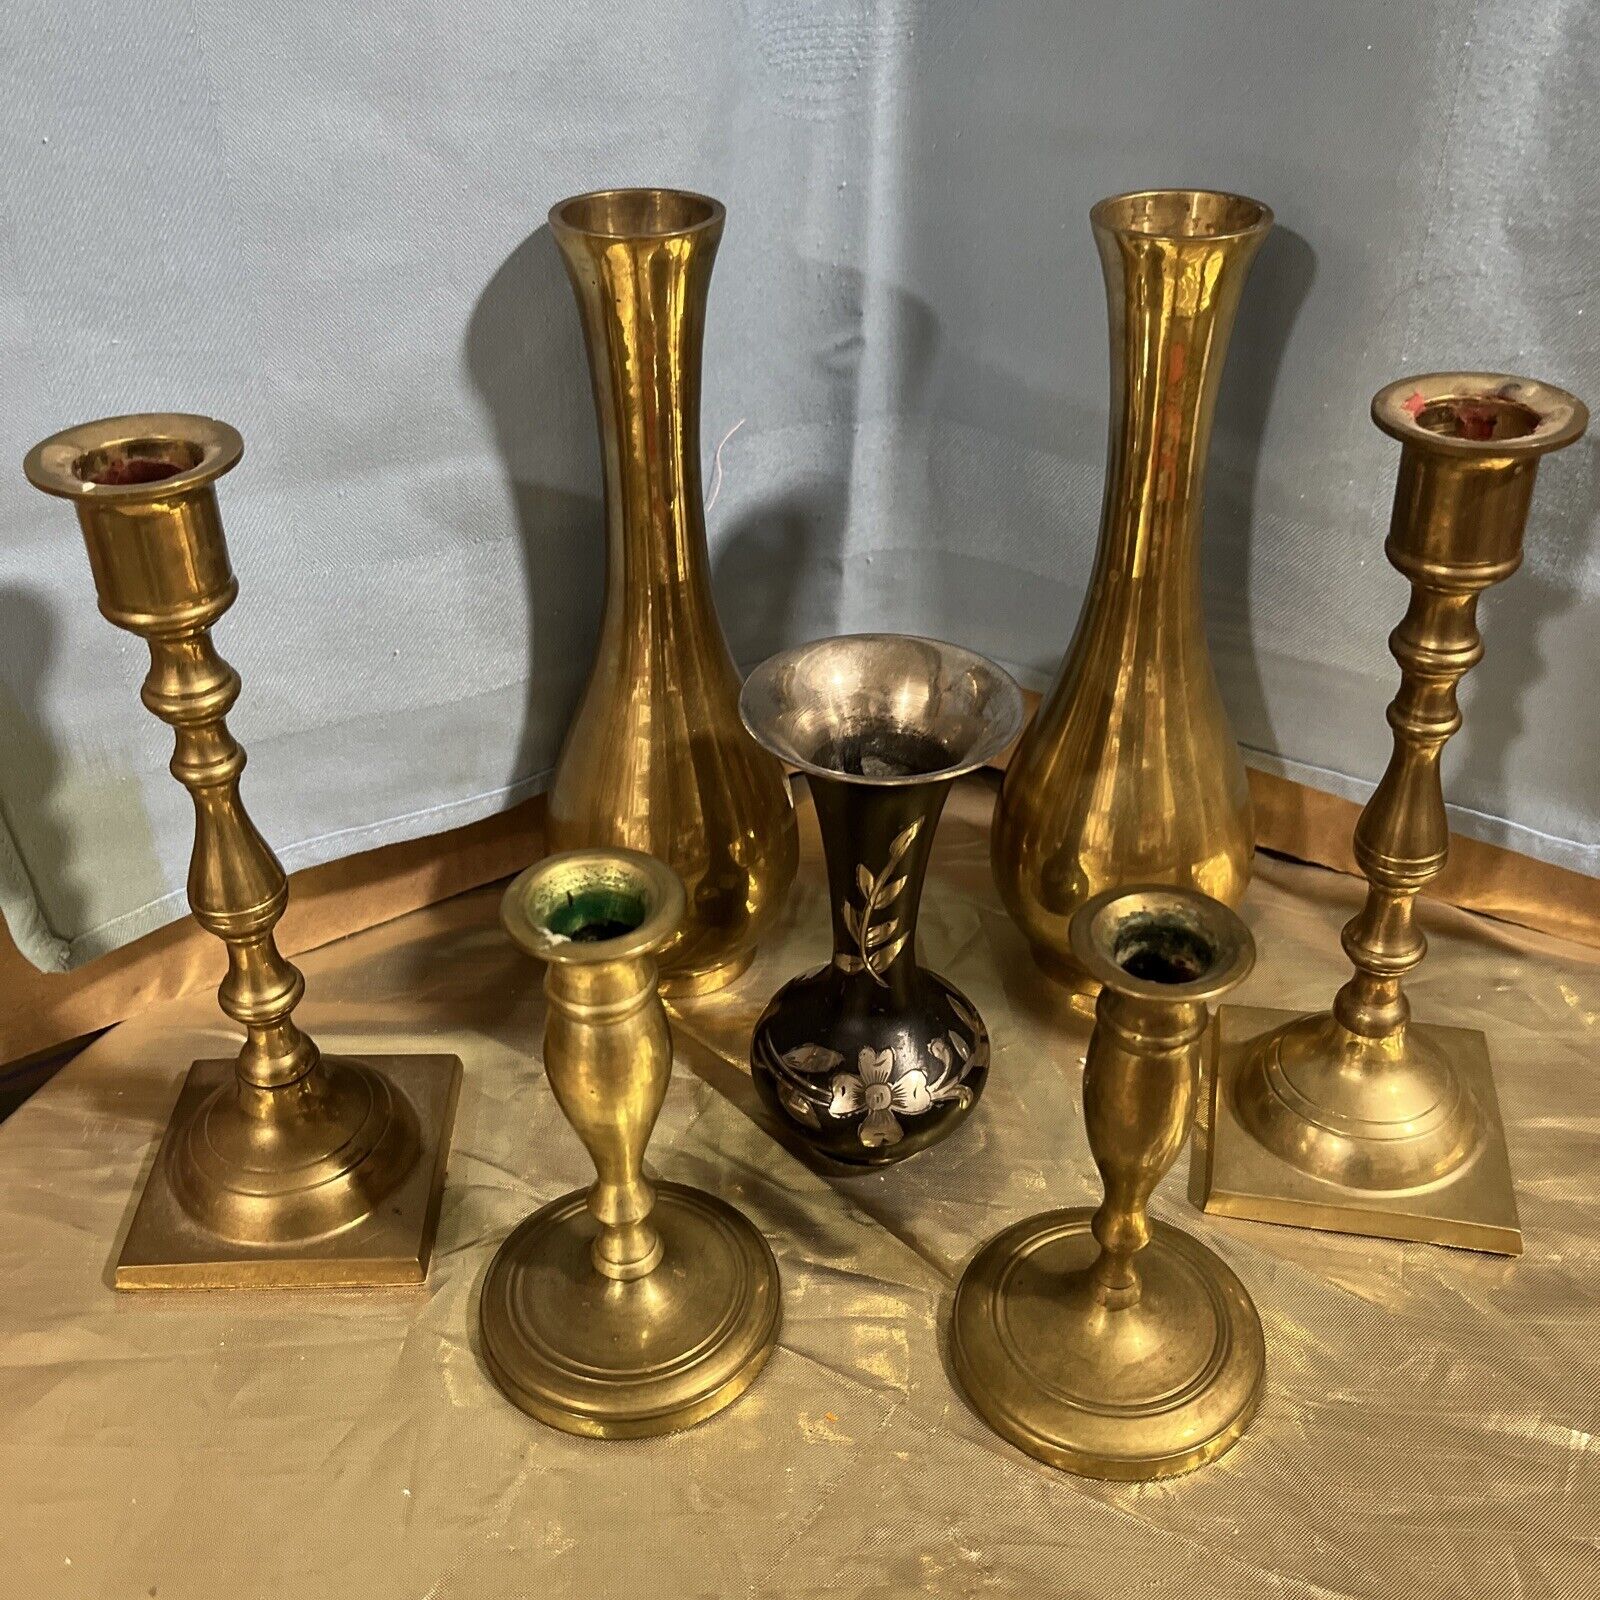 Vintage Brass Candlesticks, Candle Holder And Vases 7 Pieces